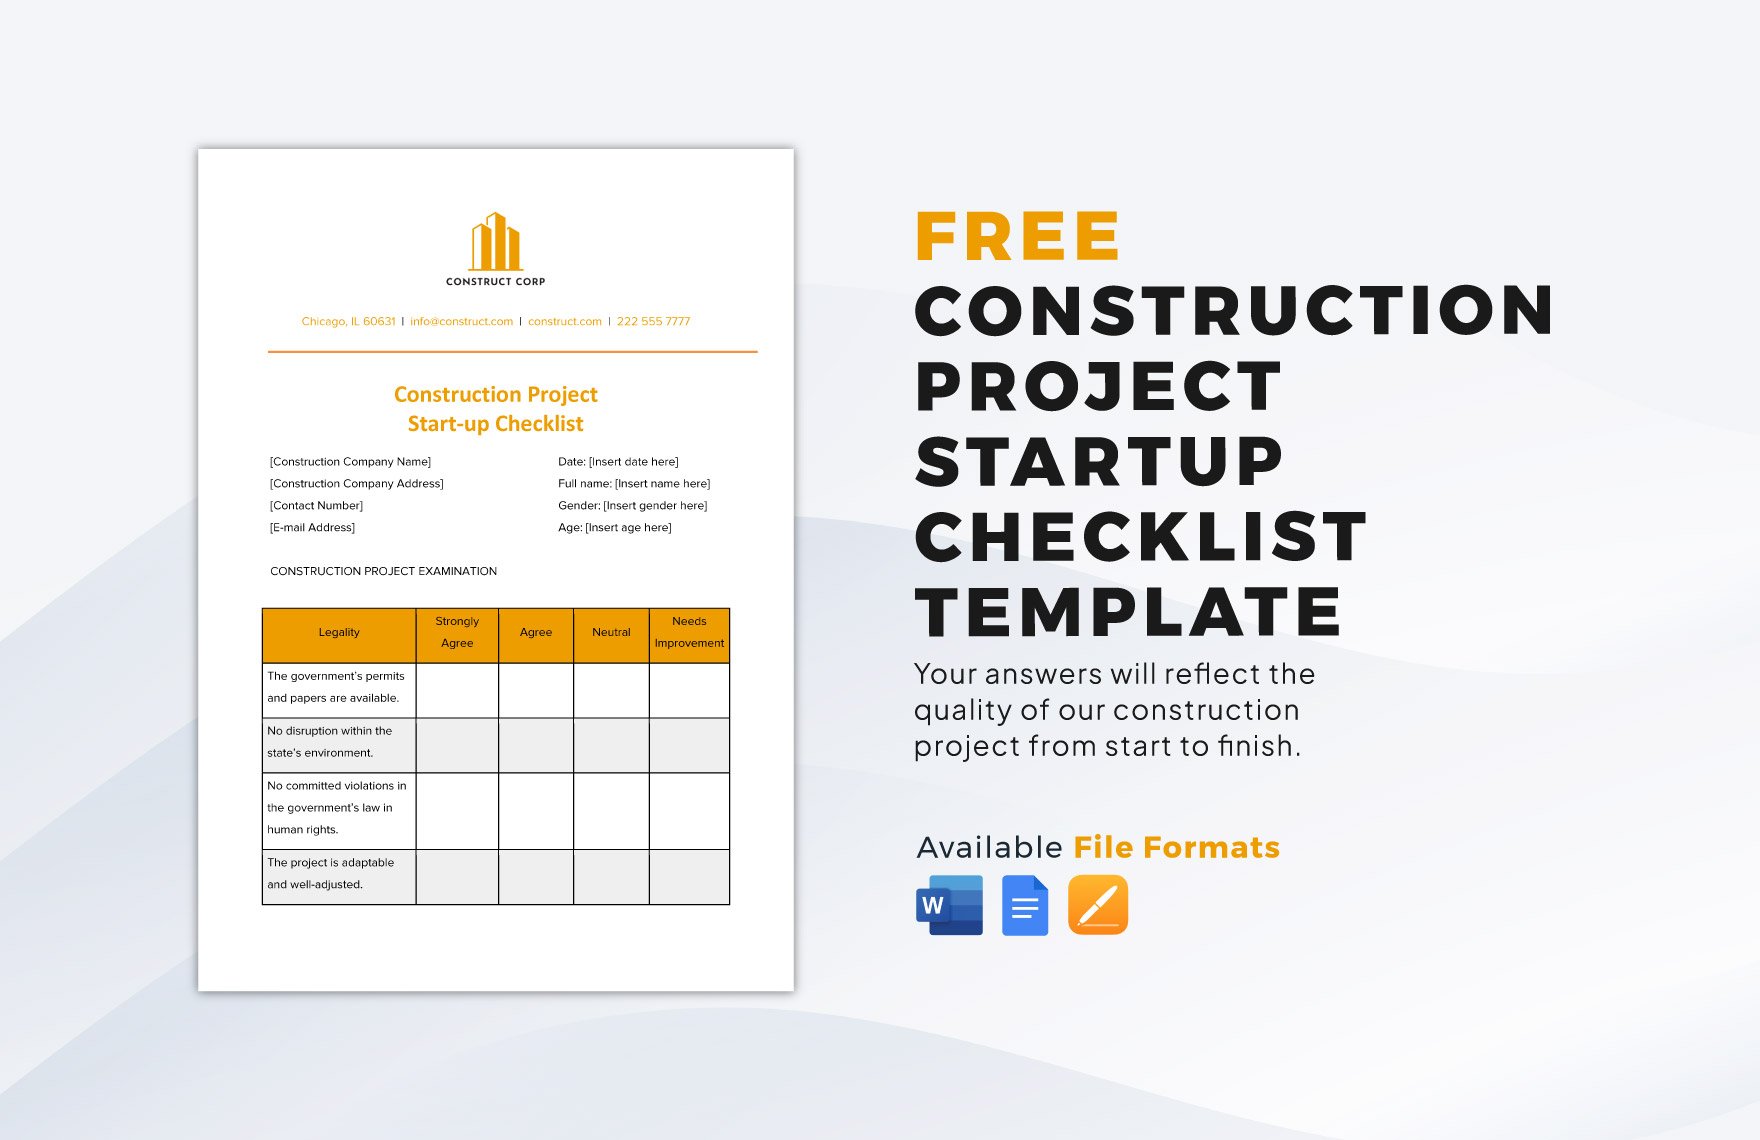 Construction Project Startup Checklist Template in Word, Google Docs, Apple Pages